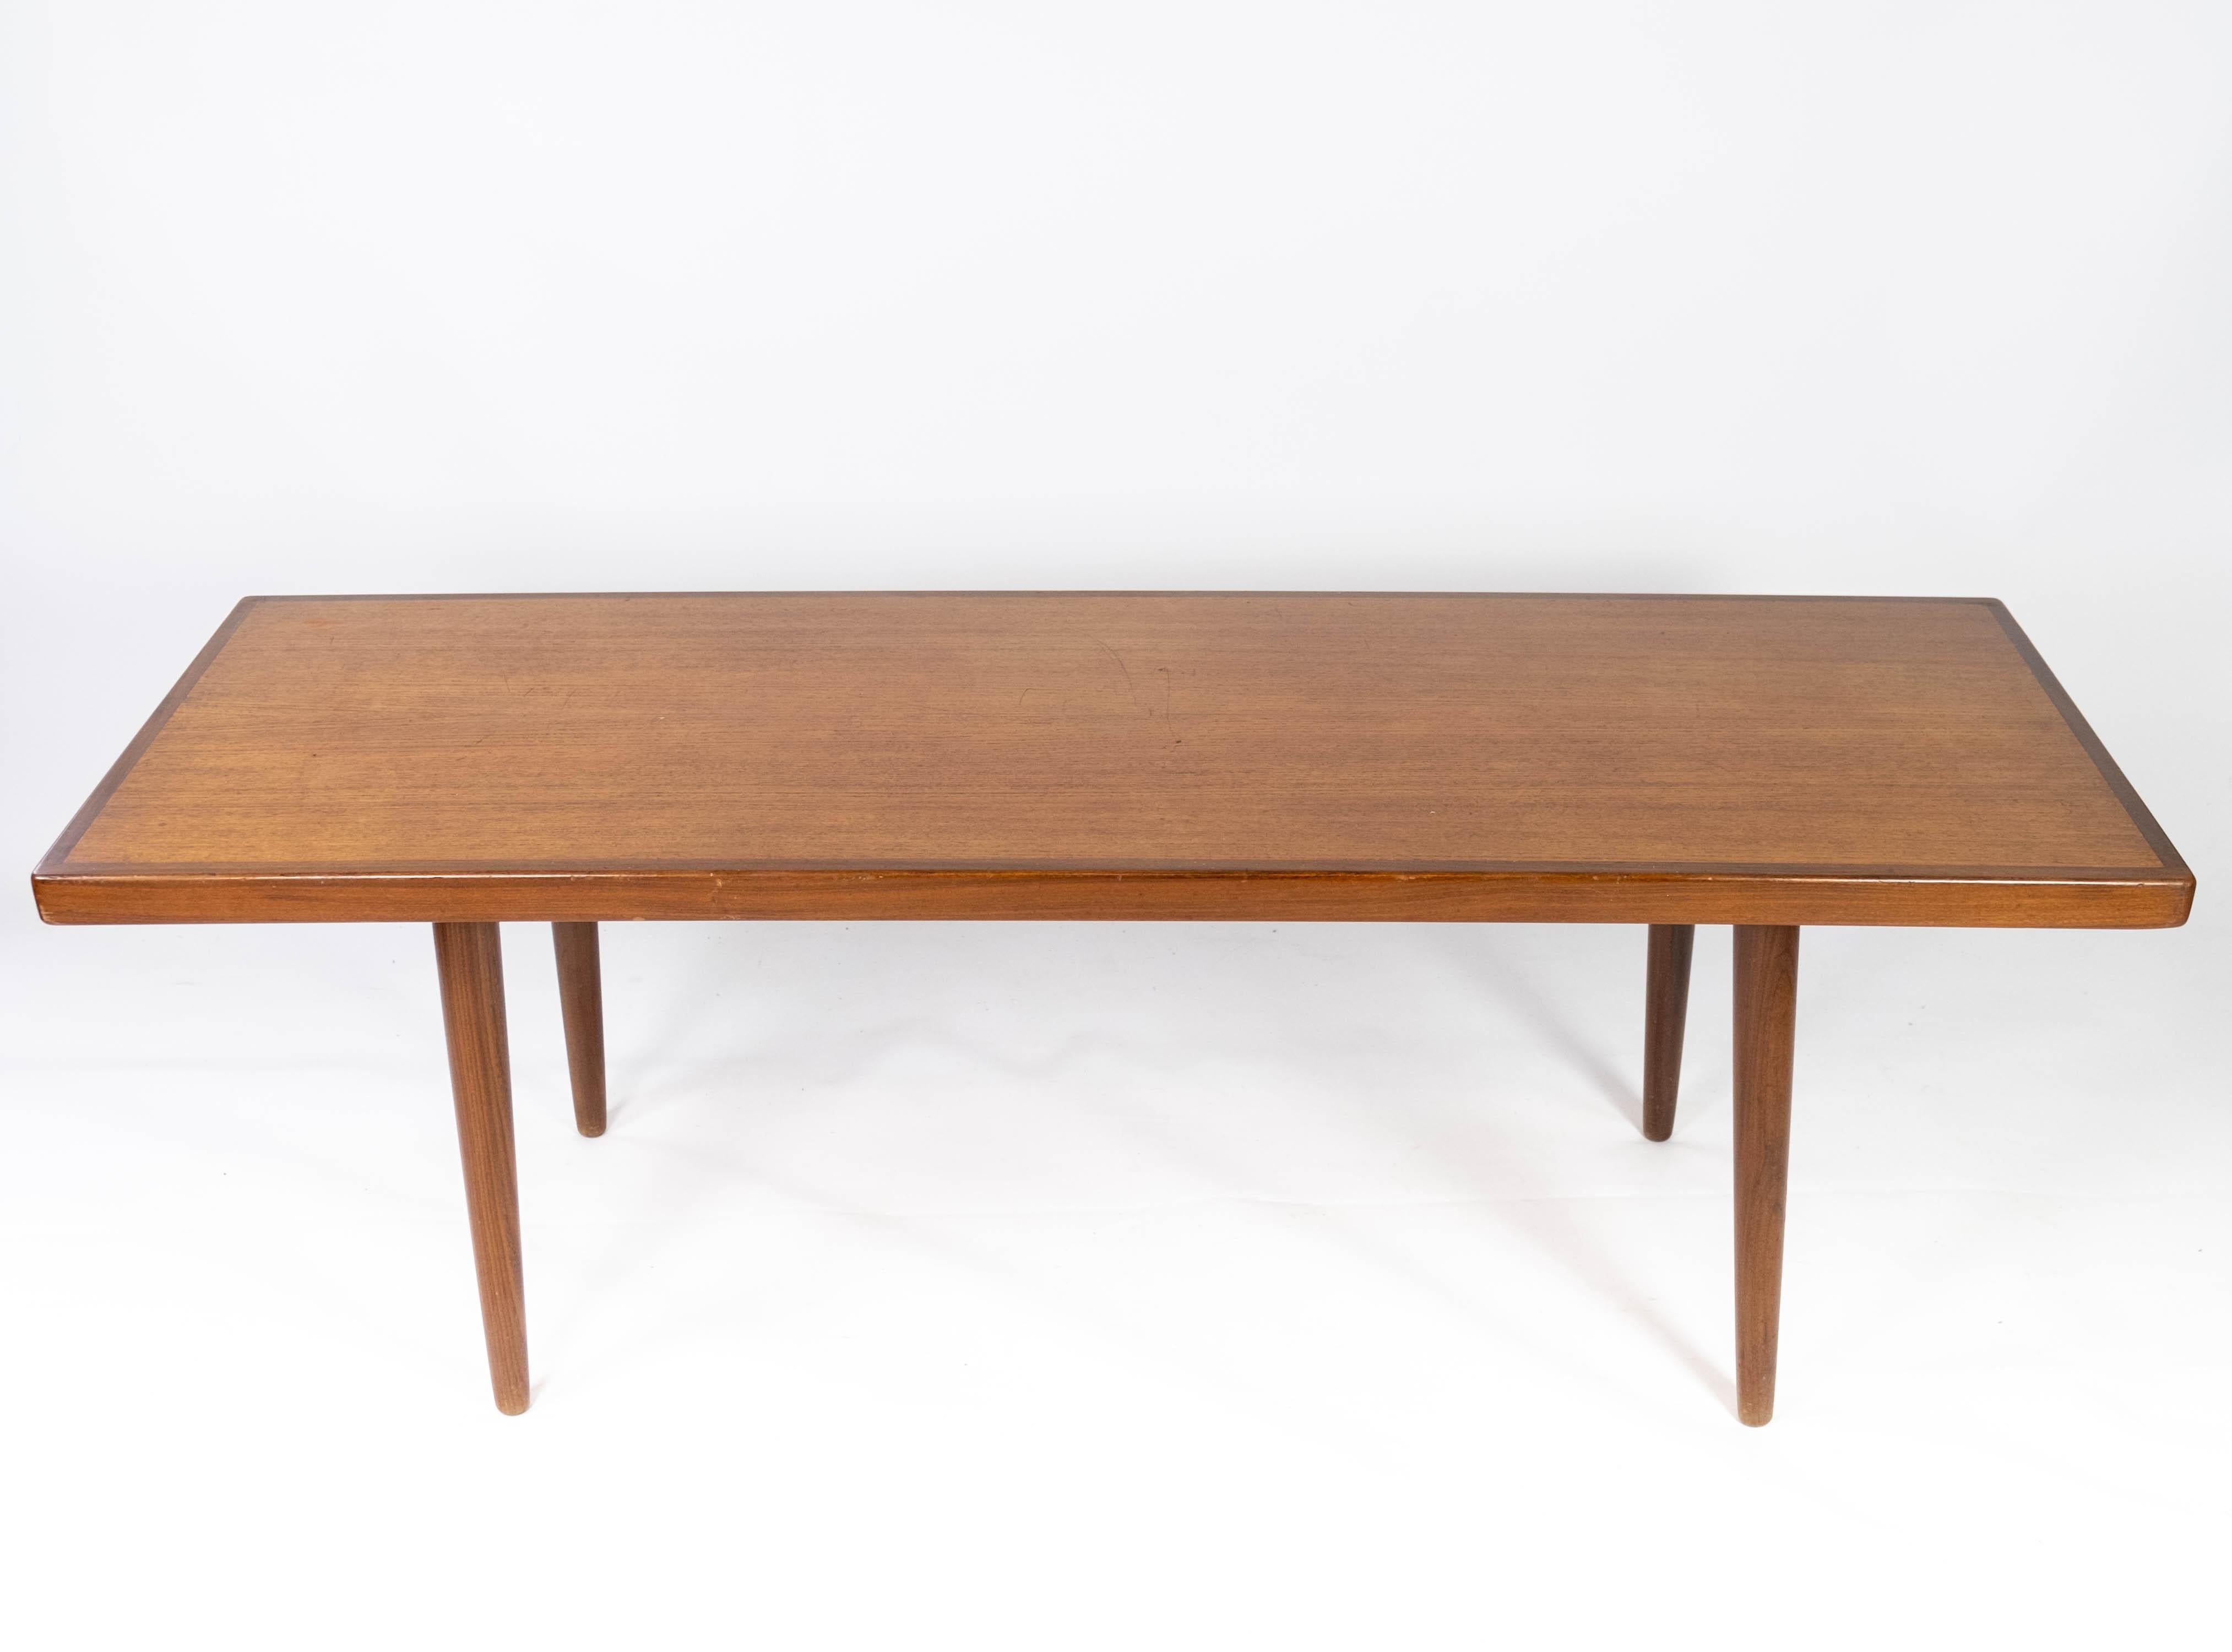 Mid-Century Modern Coffee Table Made In Teak, Danish Design From 1960s For Sale